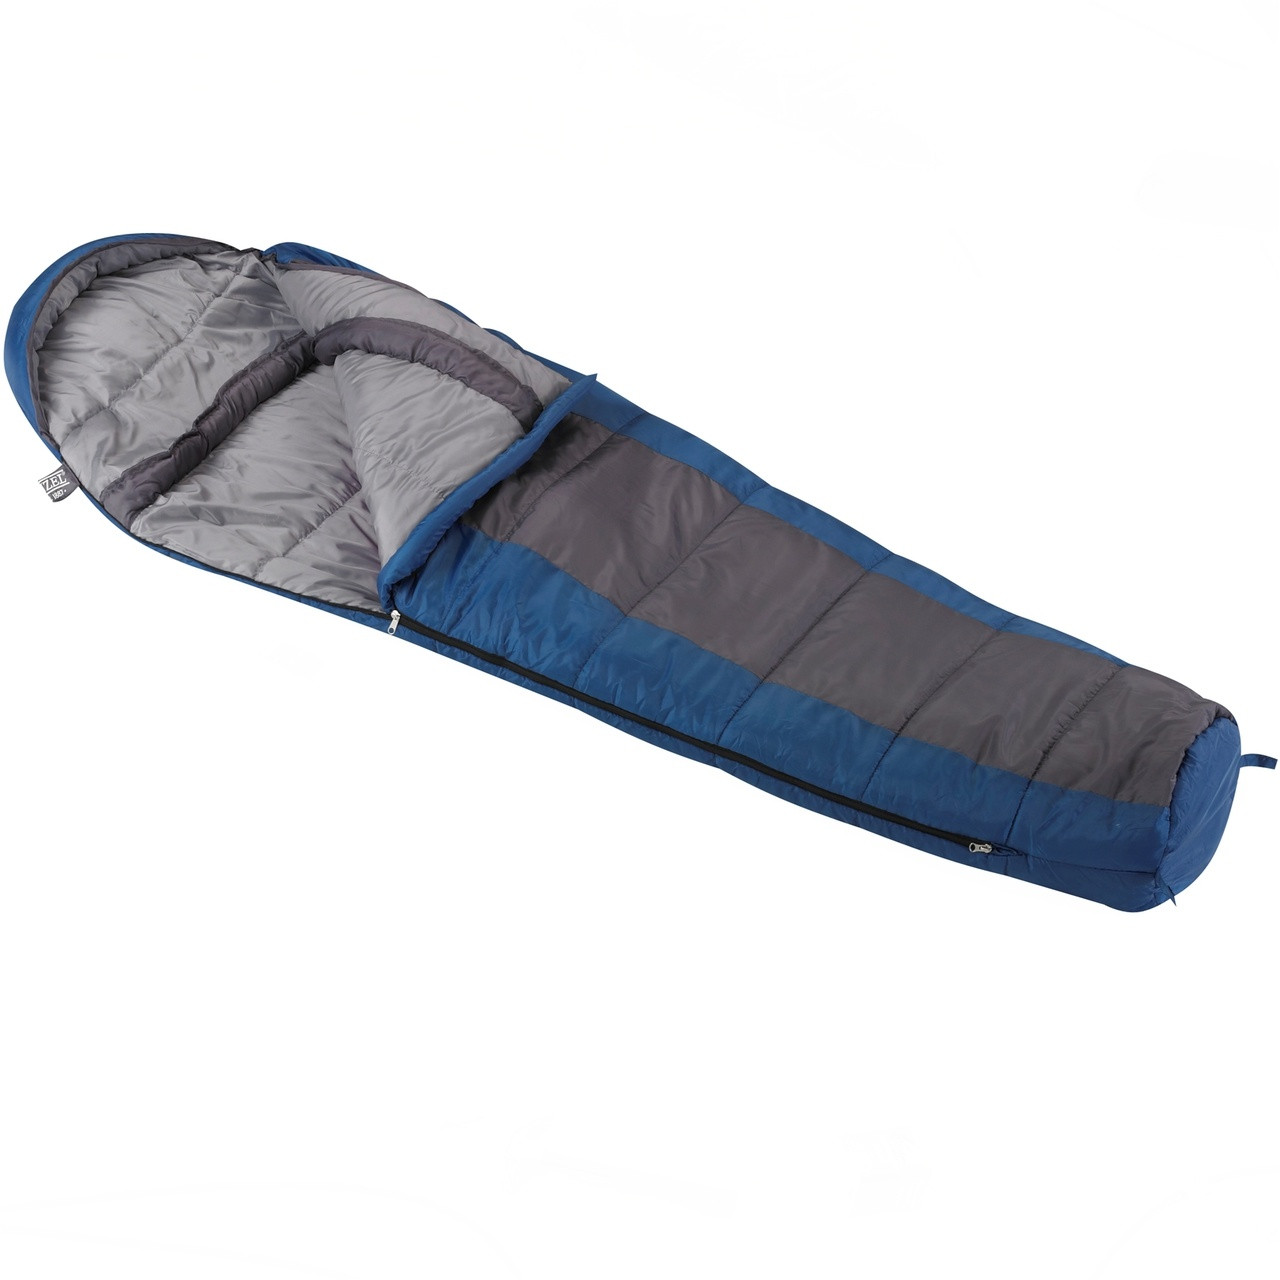 Wenzel Santa Fe Mummy 20 degree sleeping bag, blue and gray, laying flat with the corner partially unzipped and folded over showing the gray interior of the sleeping bag